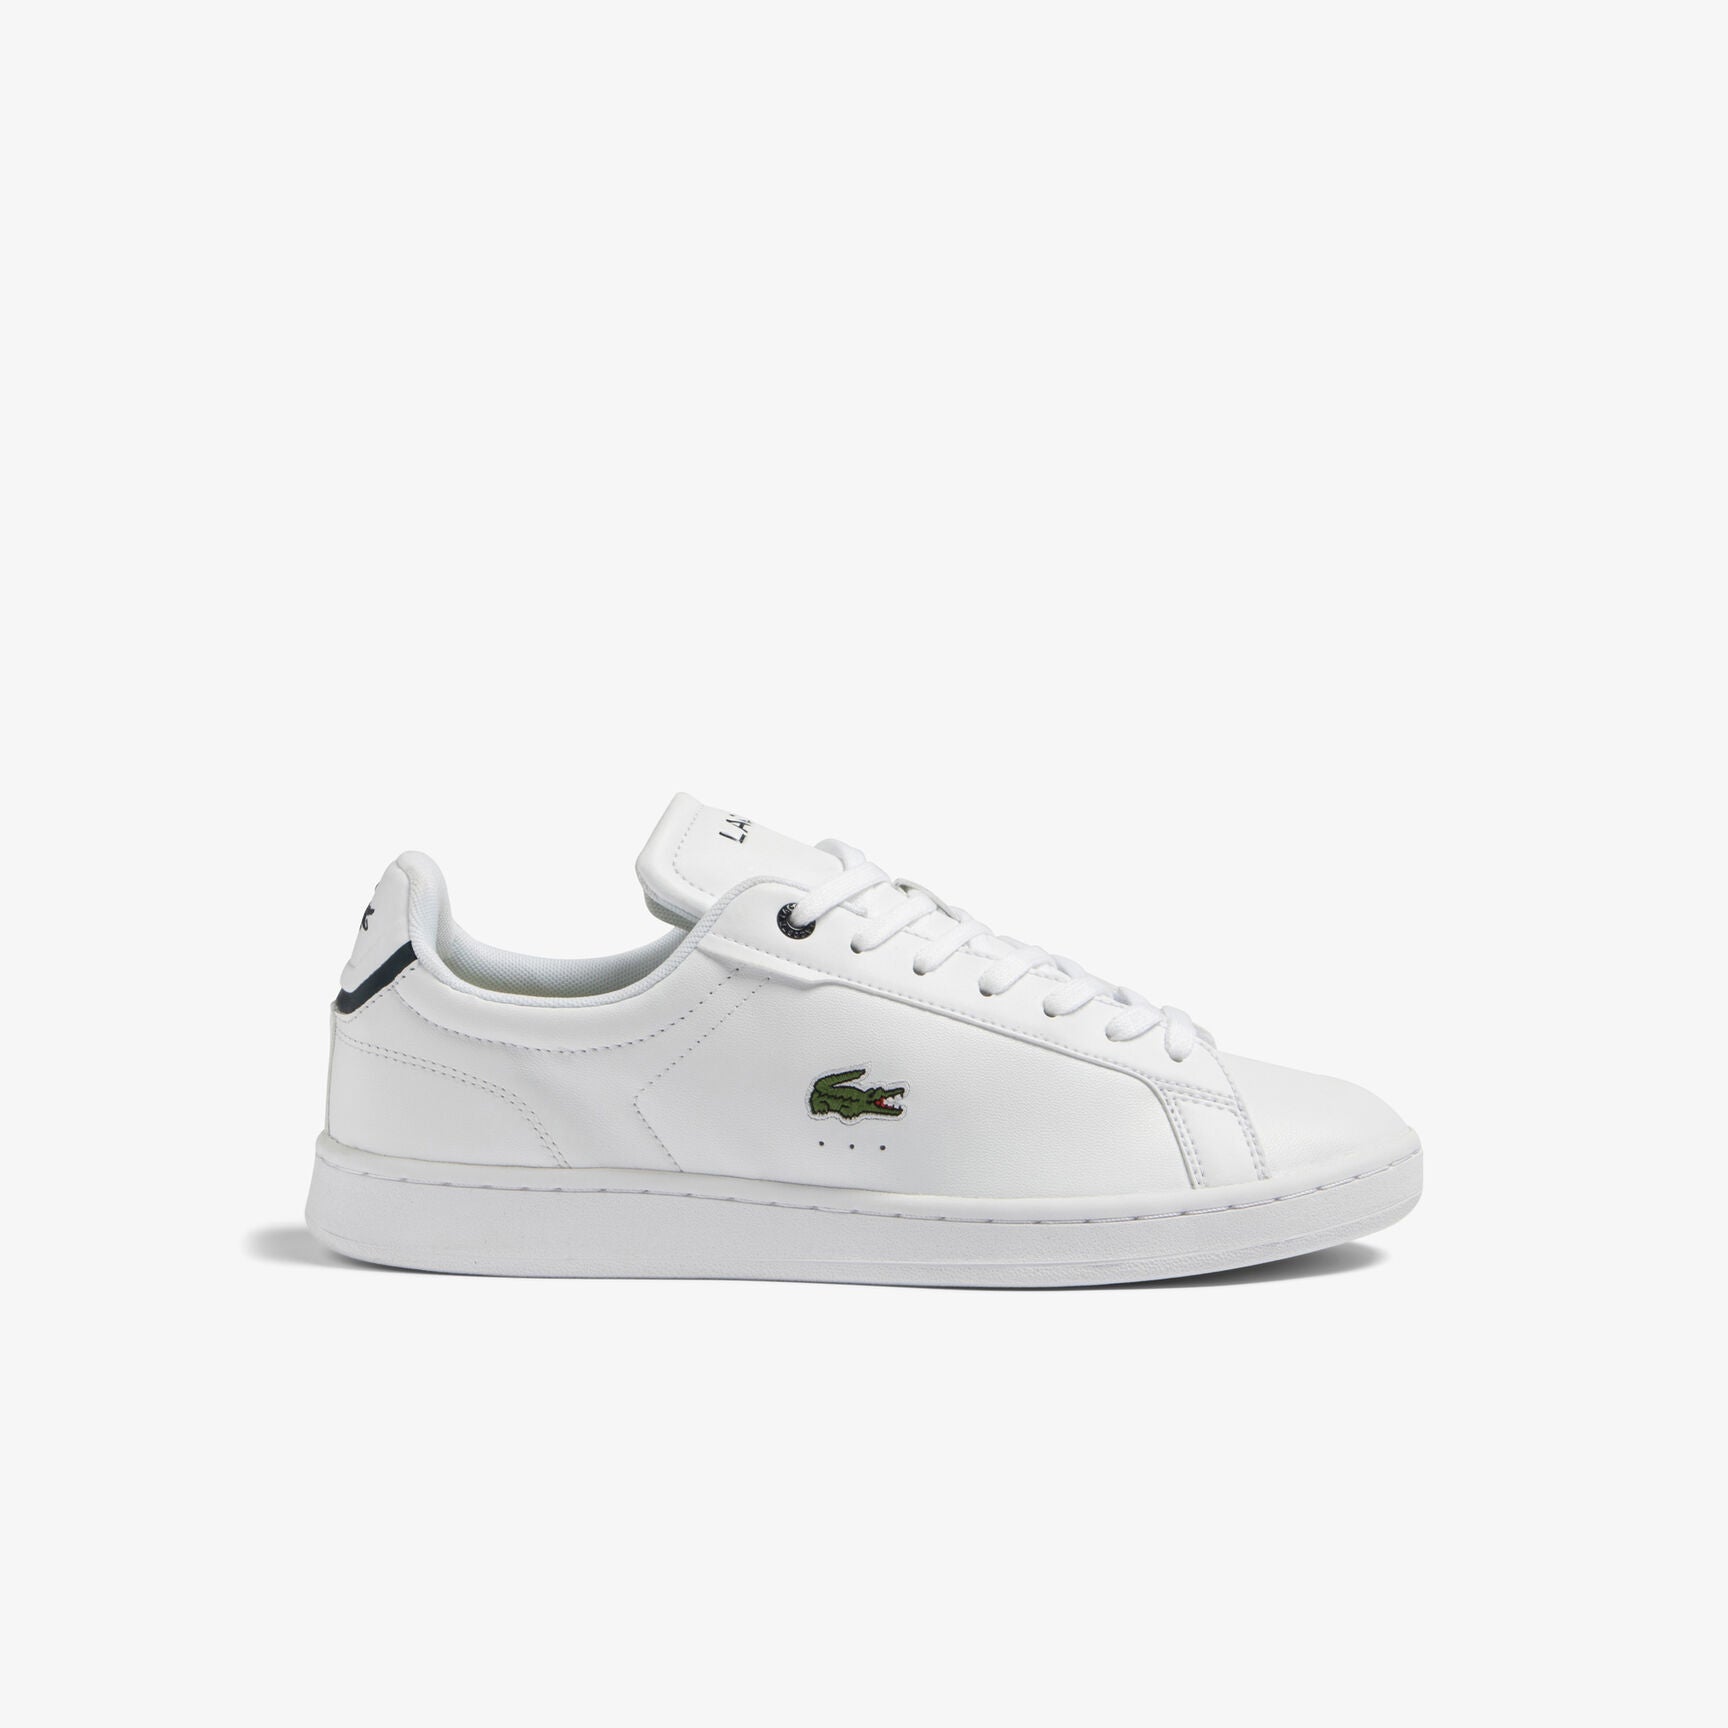 Lacoste Carnaby Pro Bi Leather Tonal Trainer Sneakers White/Navy